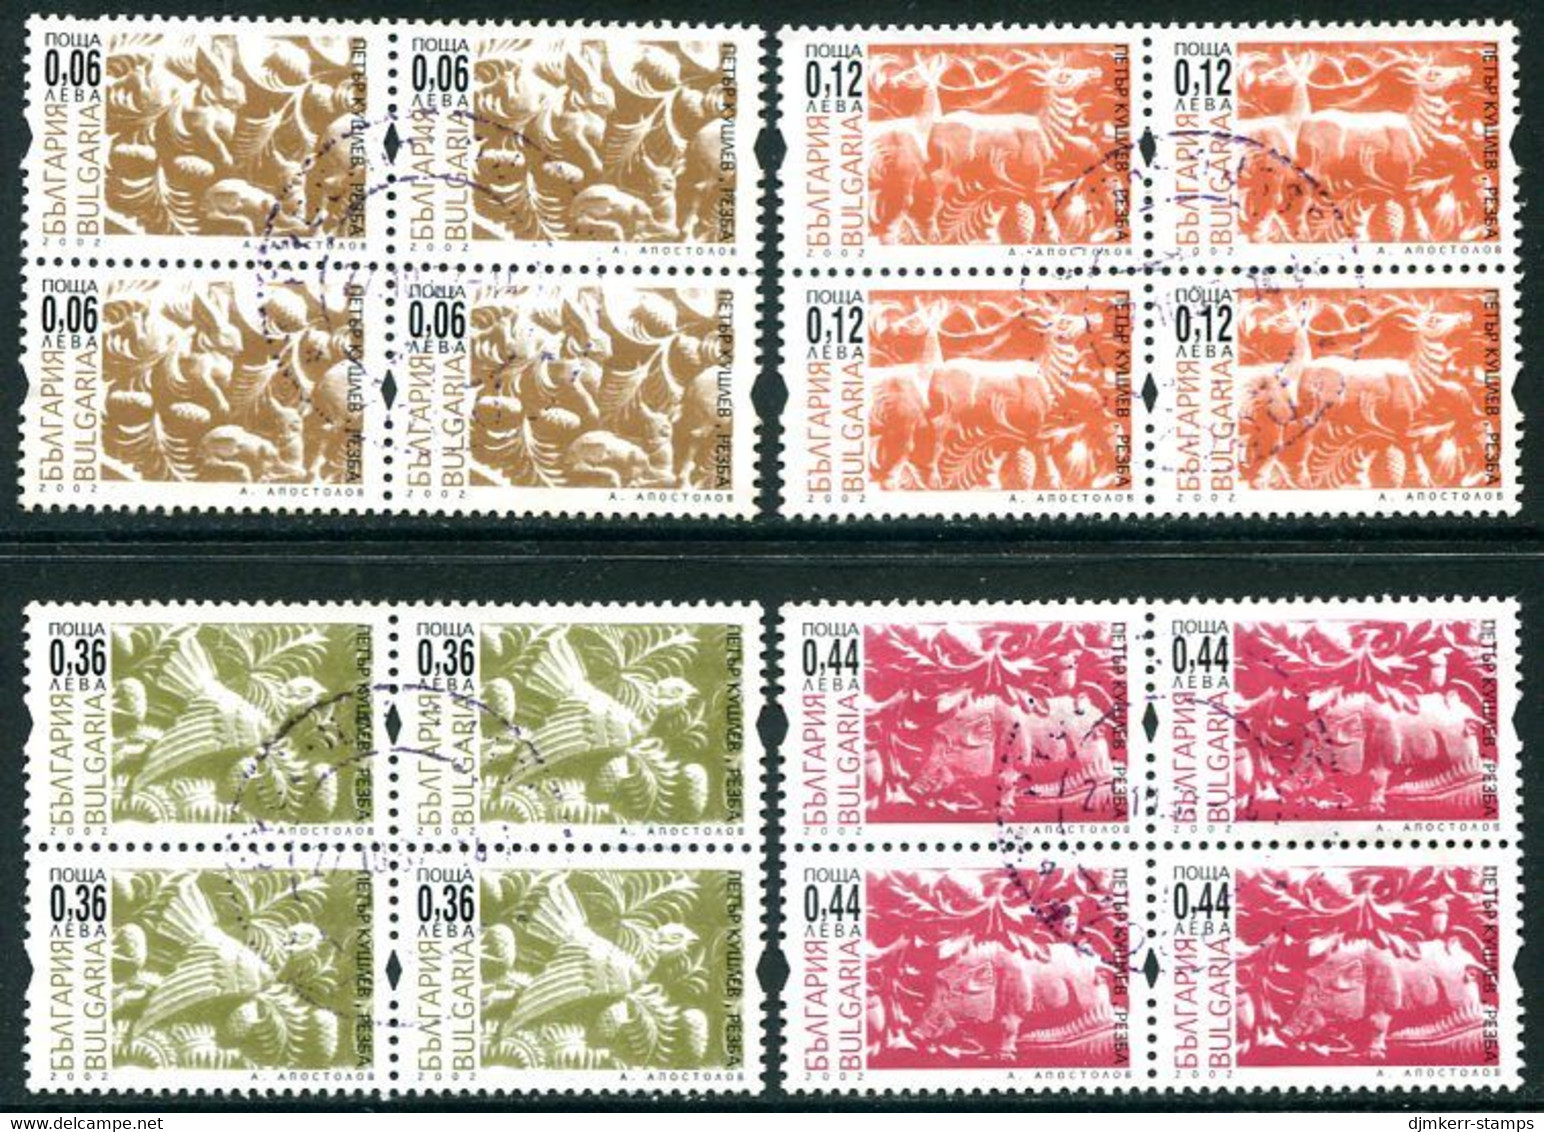 BULGARIA 2002 Kushlev Woodcuts With Security Perforation Used Blocks Of 4.  Michel 4571-74 CS X - Gebraucht